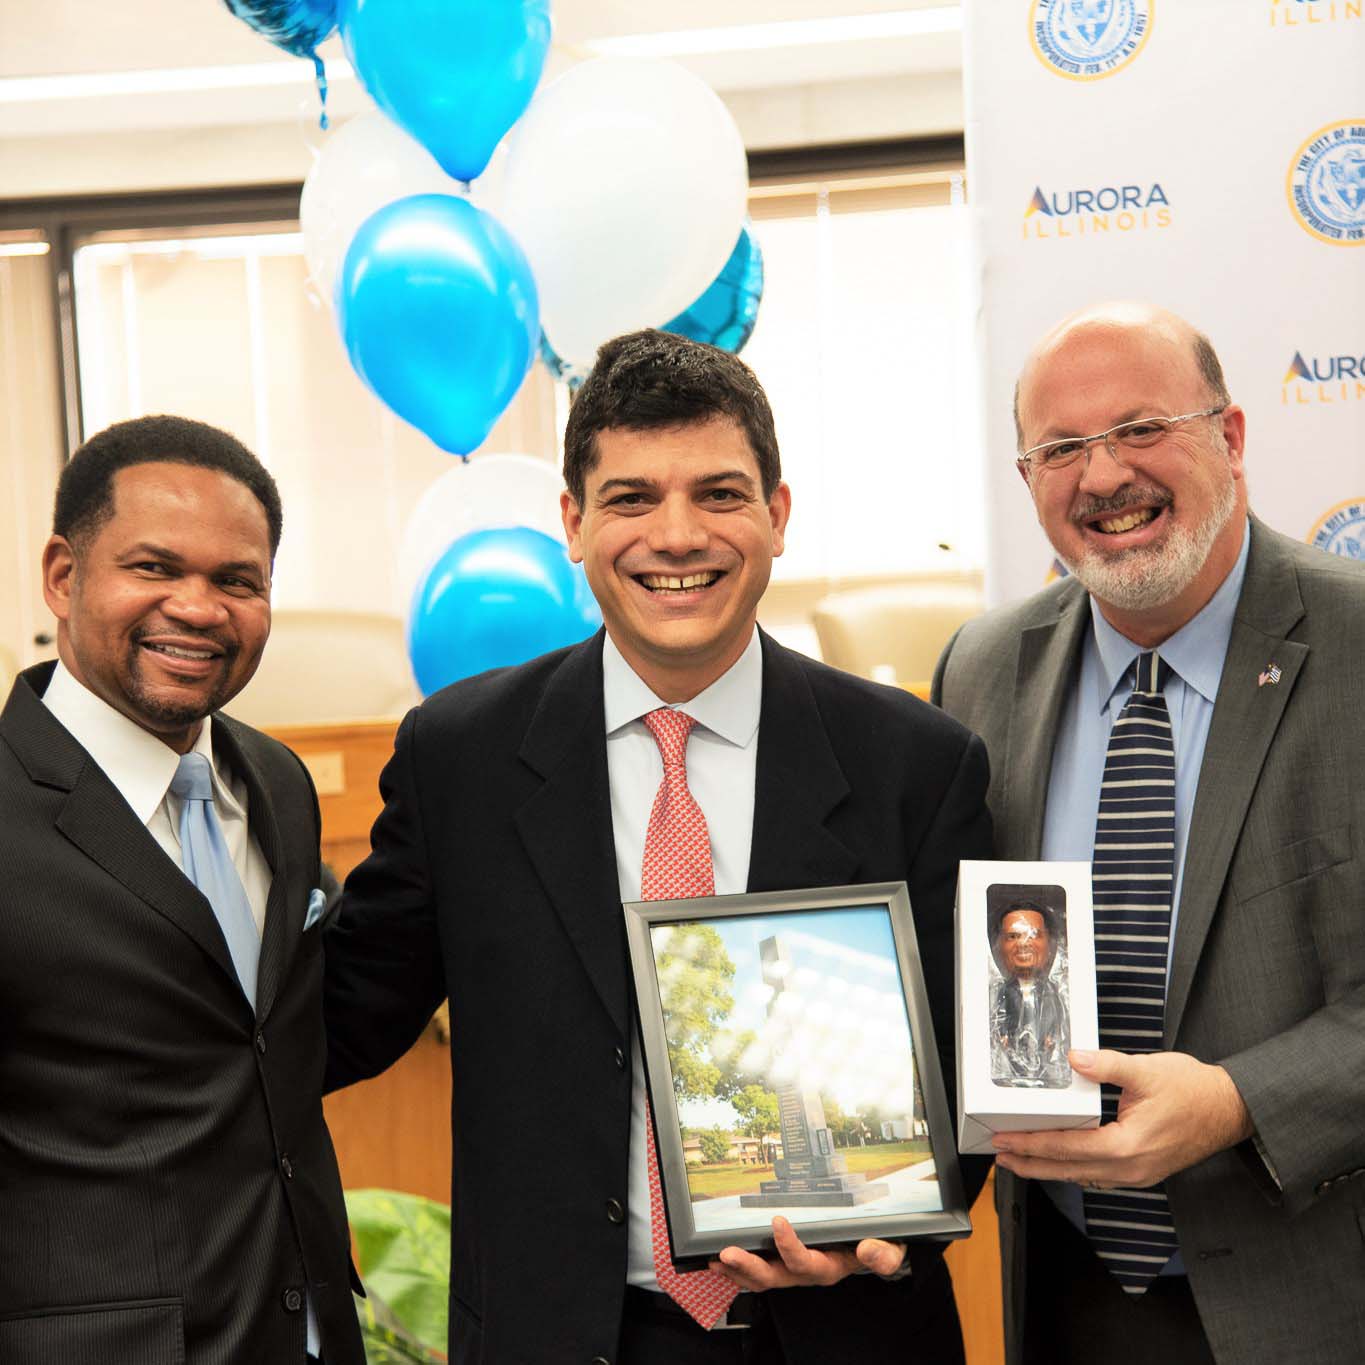 December 16th 2021 American Philhellenes Society and the City of Aurora held a reception to honor Consul General of Greece in Chicago Emanuel Koubarakis